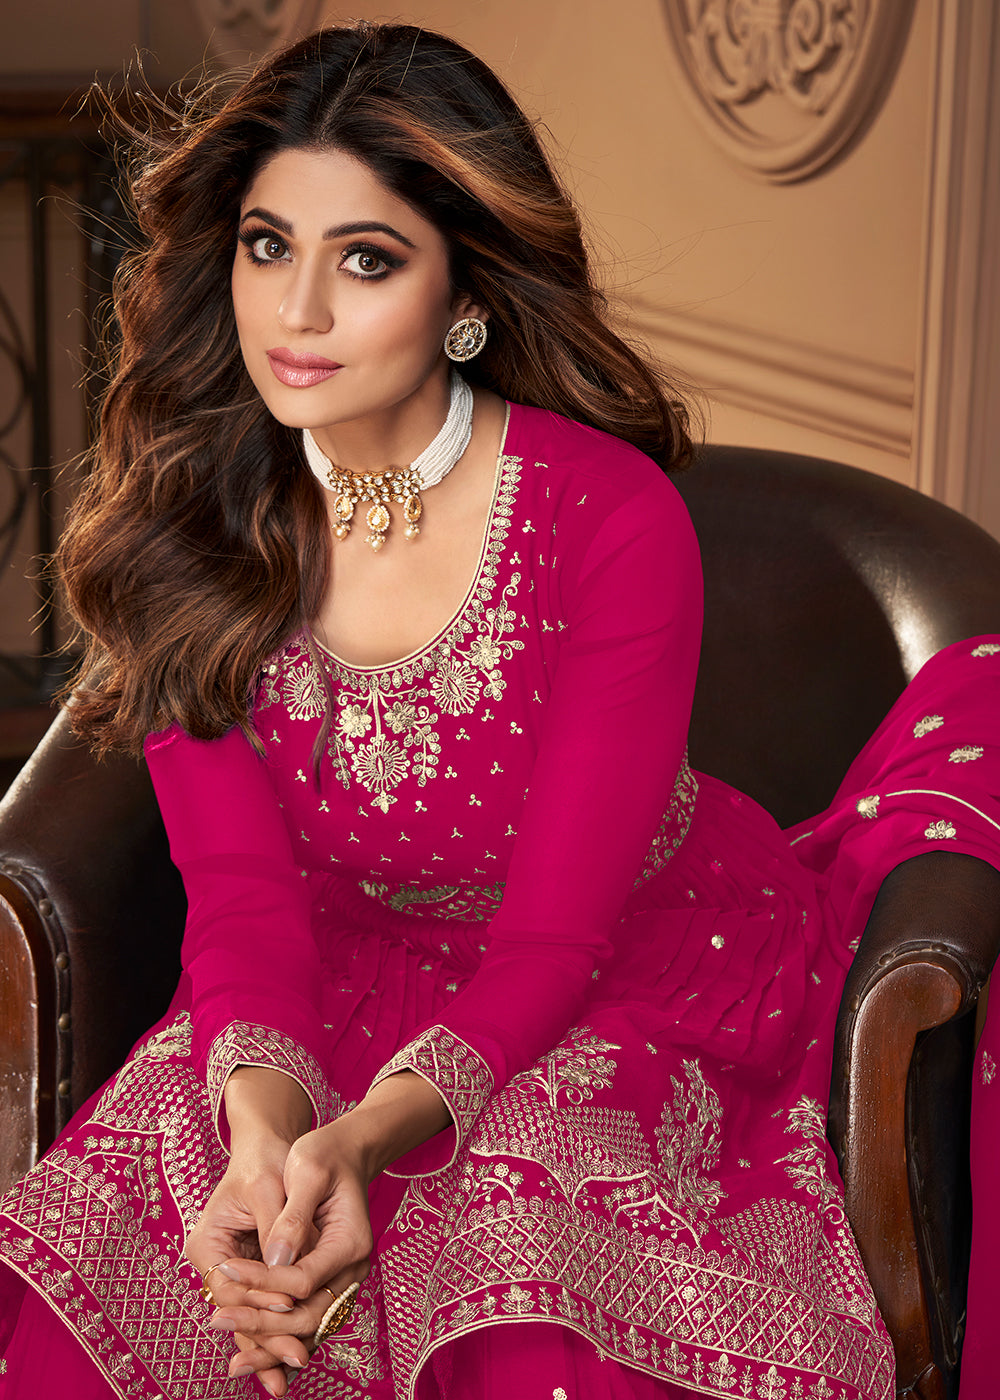 Shop Now Peplum Designed Hot Pink Embroidered Sharara Suit Online at Empress Clothing in USA, UK, Canada, Germany & Worldwide.